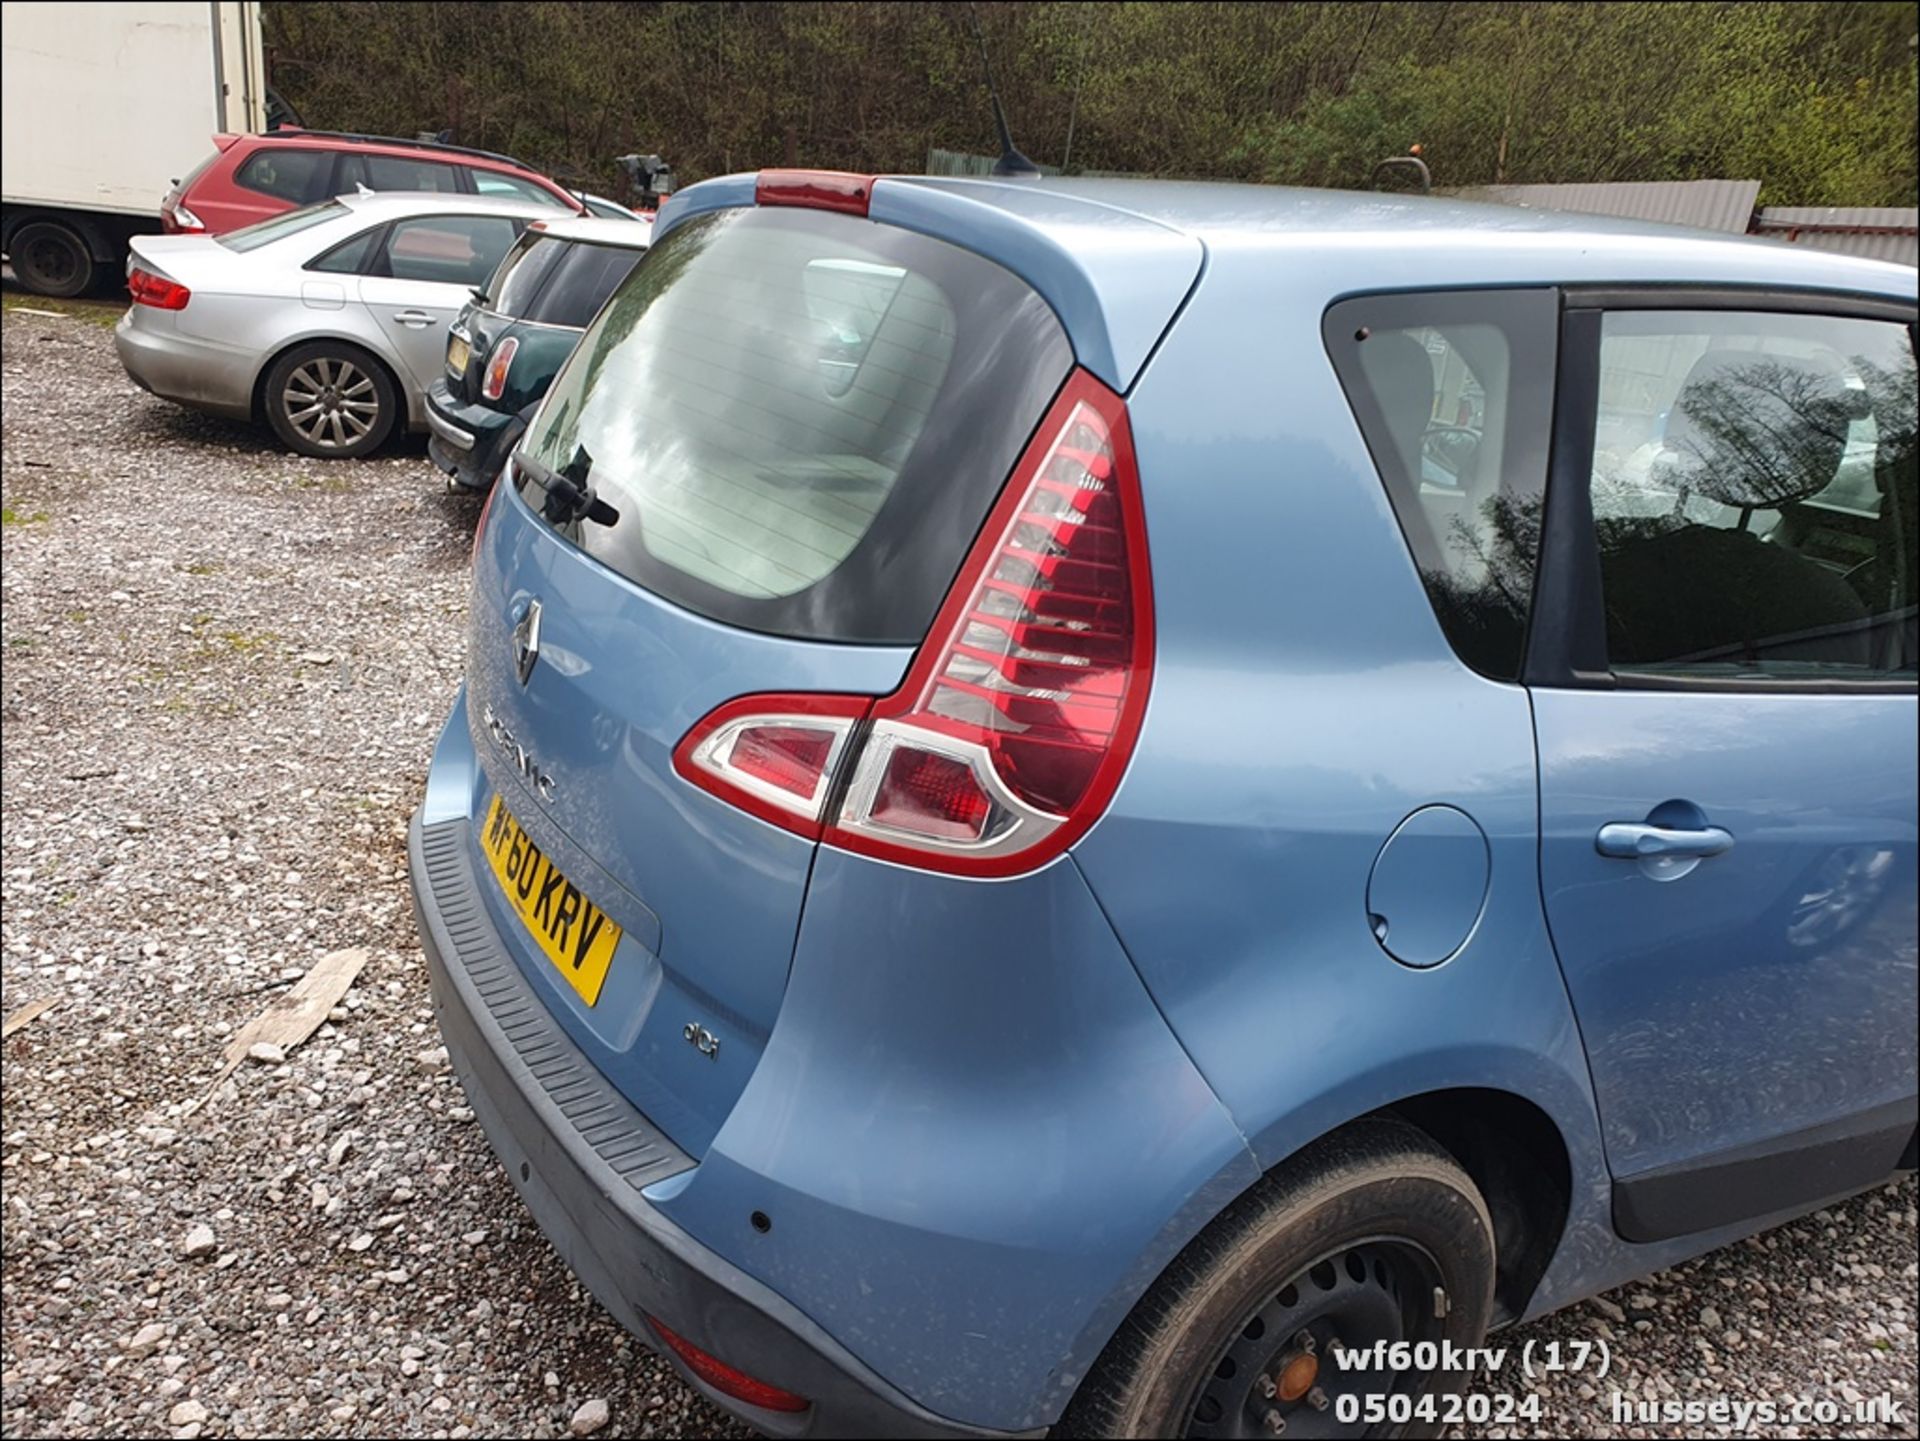 10/60 RENAULT SCENIC EXPRESSION DCI 105 - 1461cc 5dr MPV (Blue) - Image 18 of 50